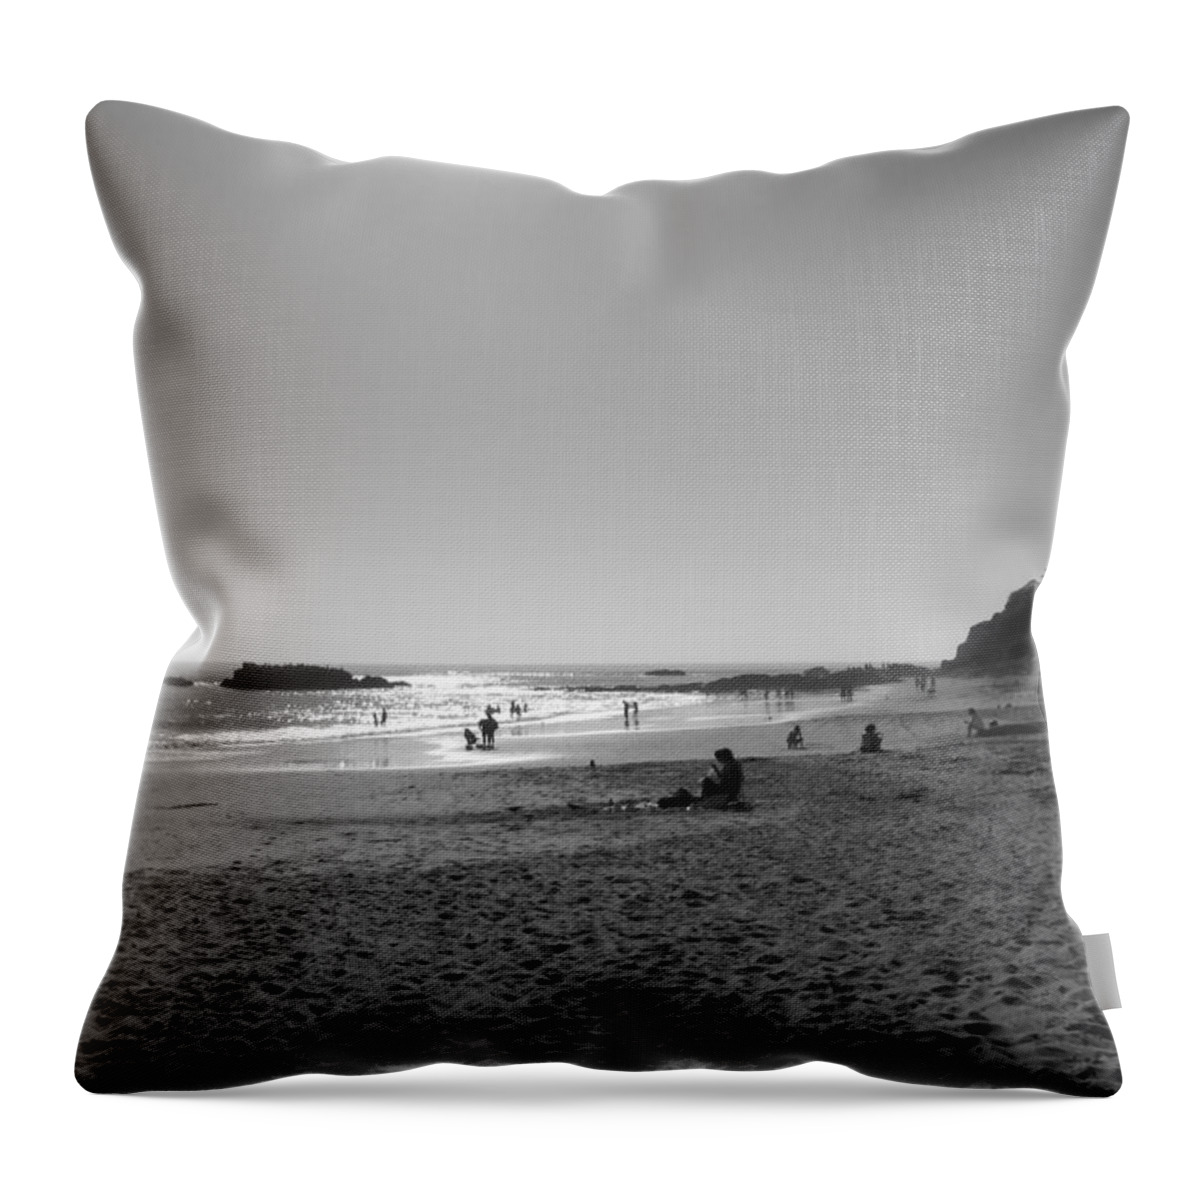 Bw Throw Pillow featuring the photograph Laguna Sunset Reflection by Connie Fox